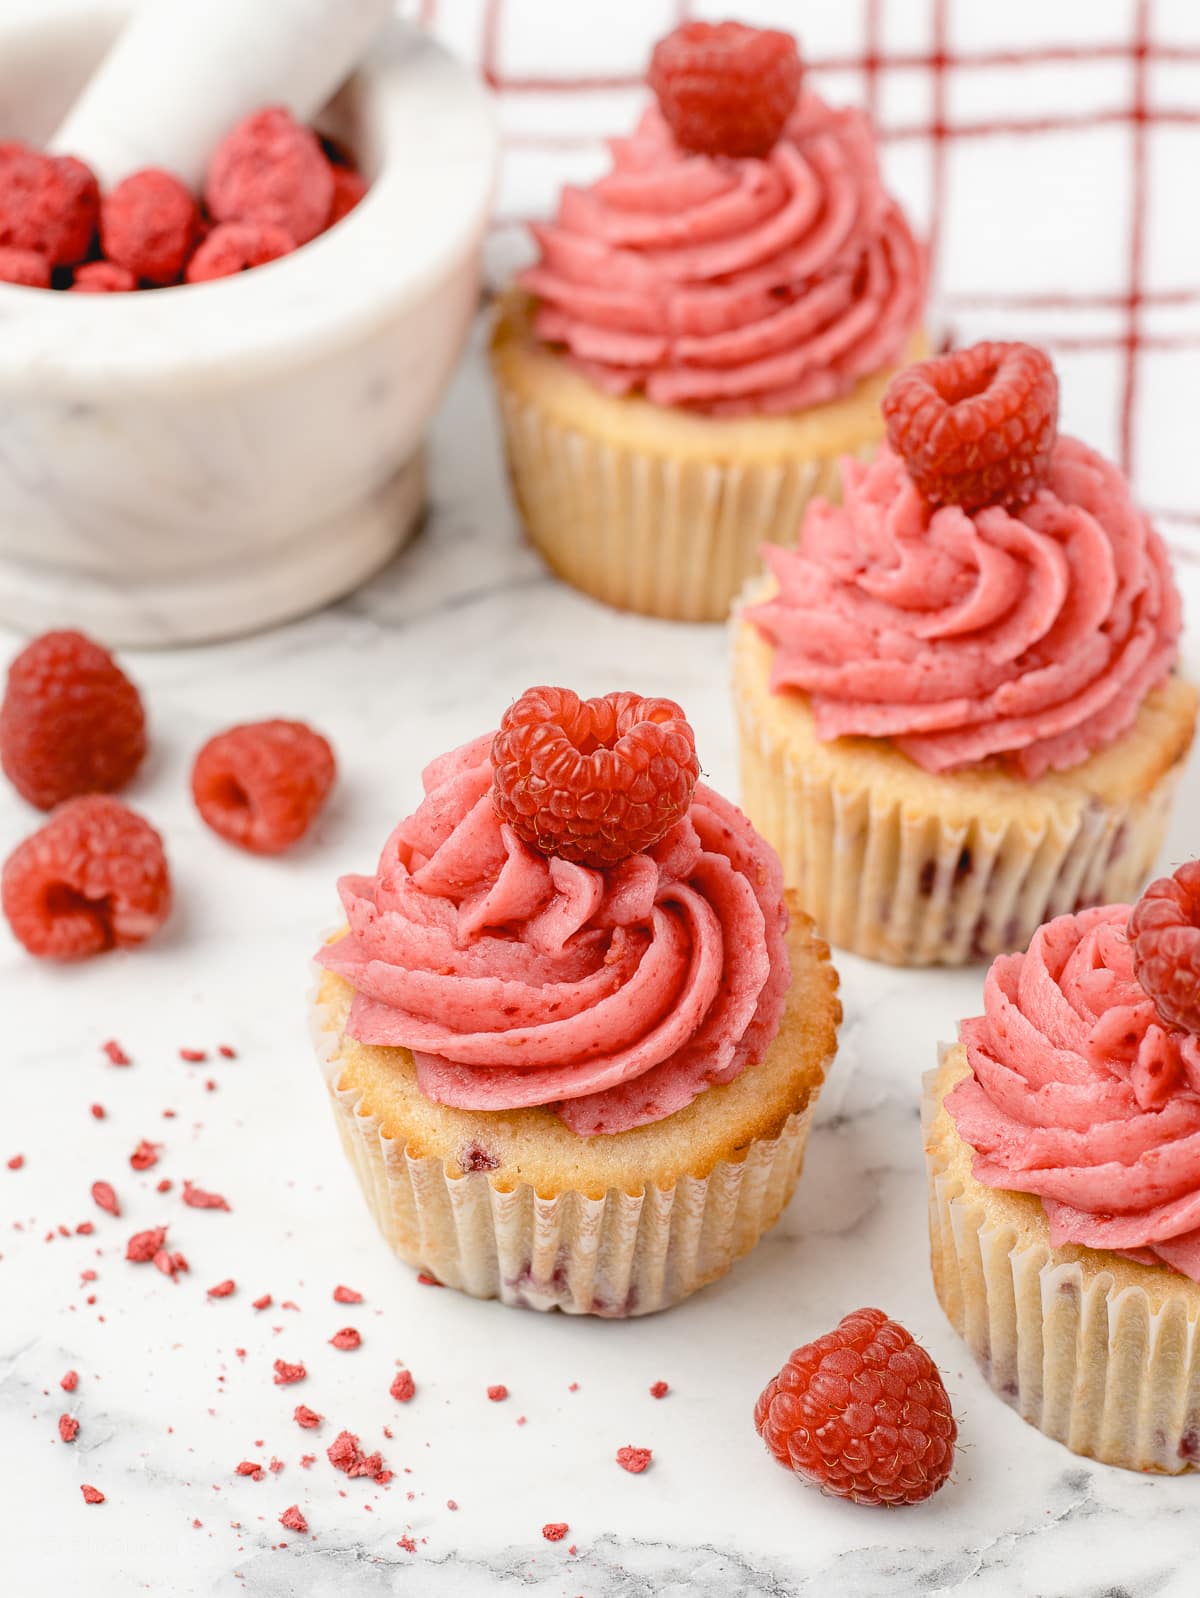 Raspberry Cupcakes decorated with fresh raspberries and freeze dried raspberries in a mortar and pestle.